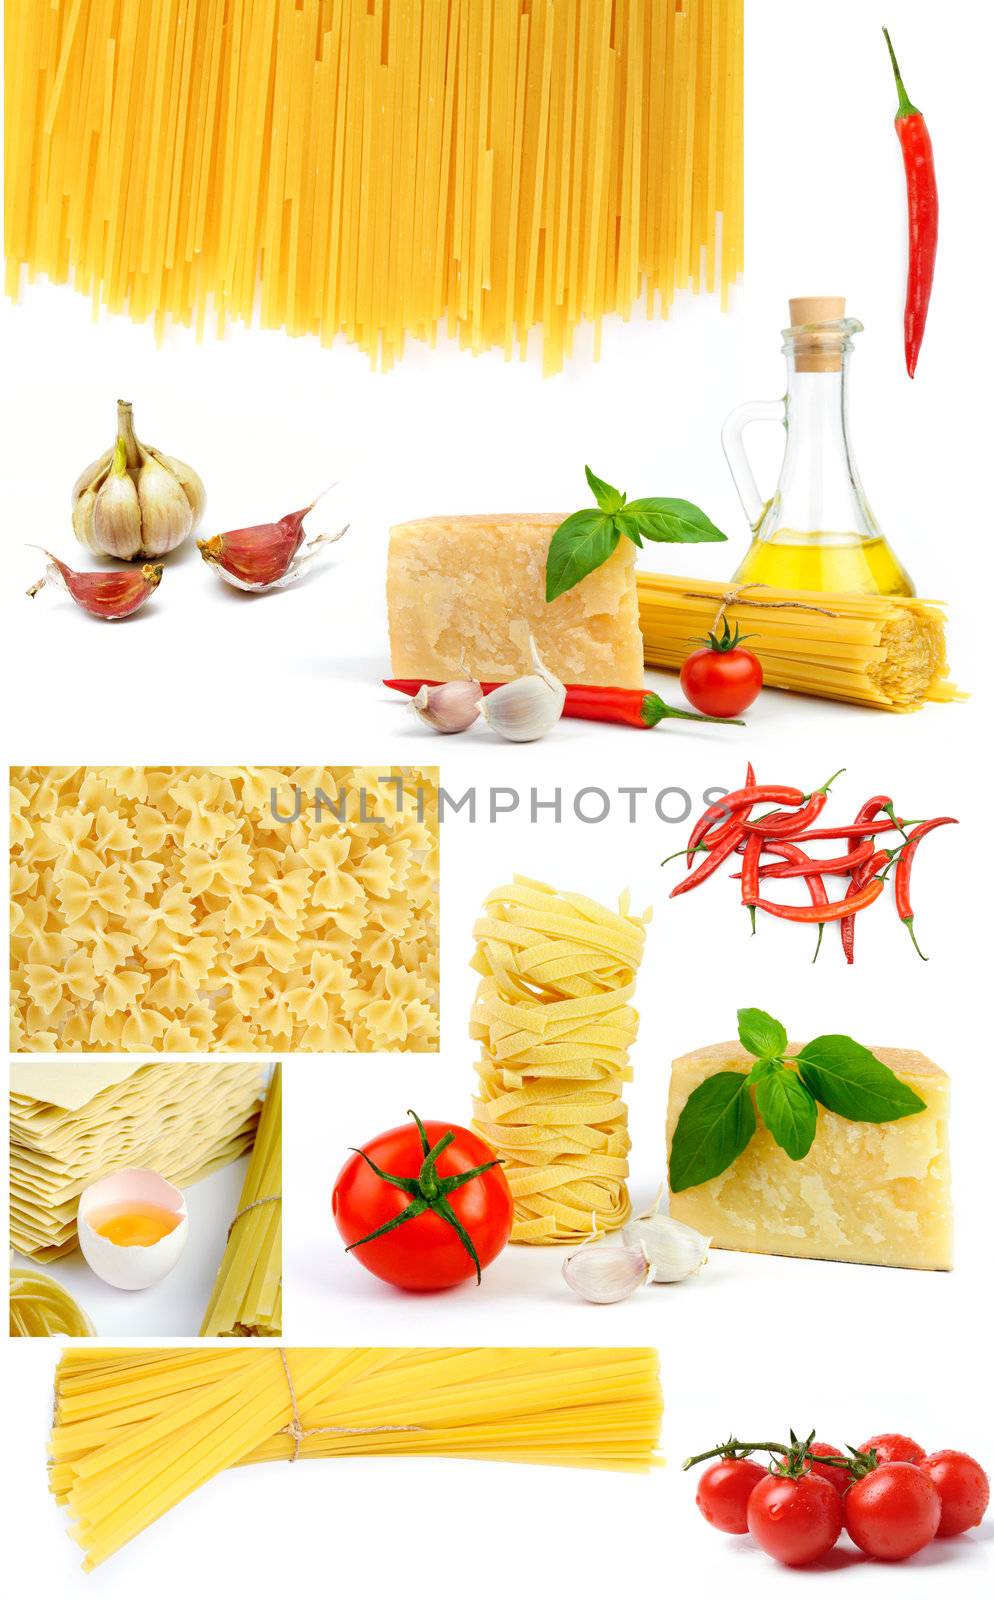 An image of various italian food: pasta, cheese, tomatoes